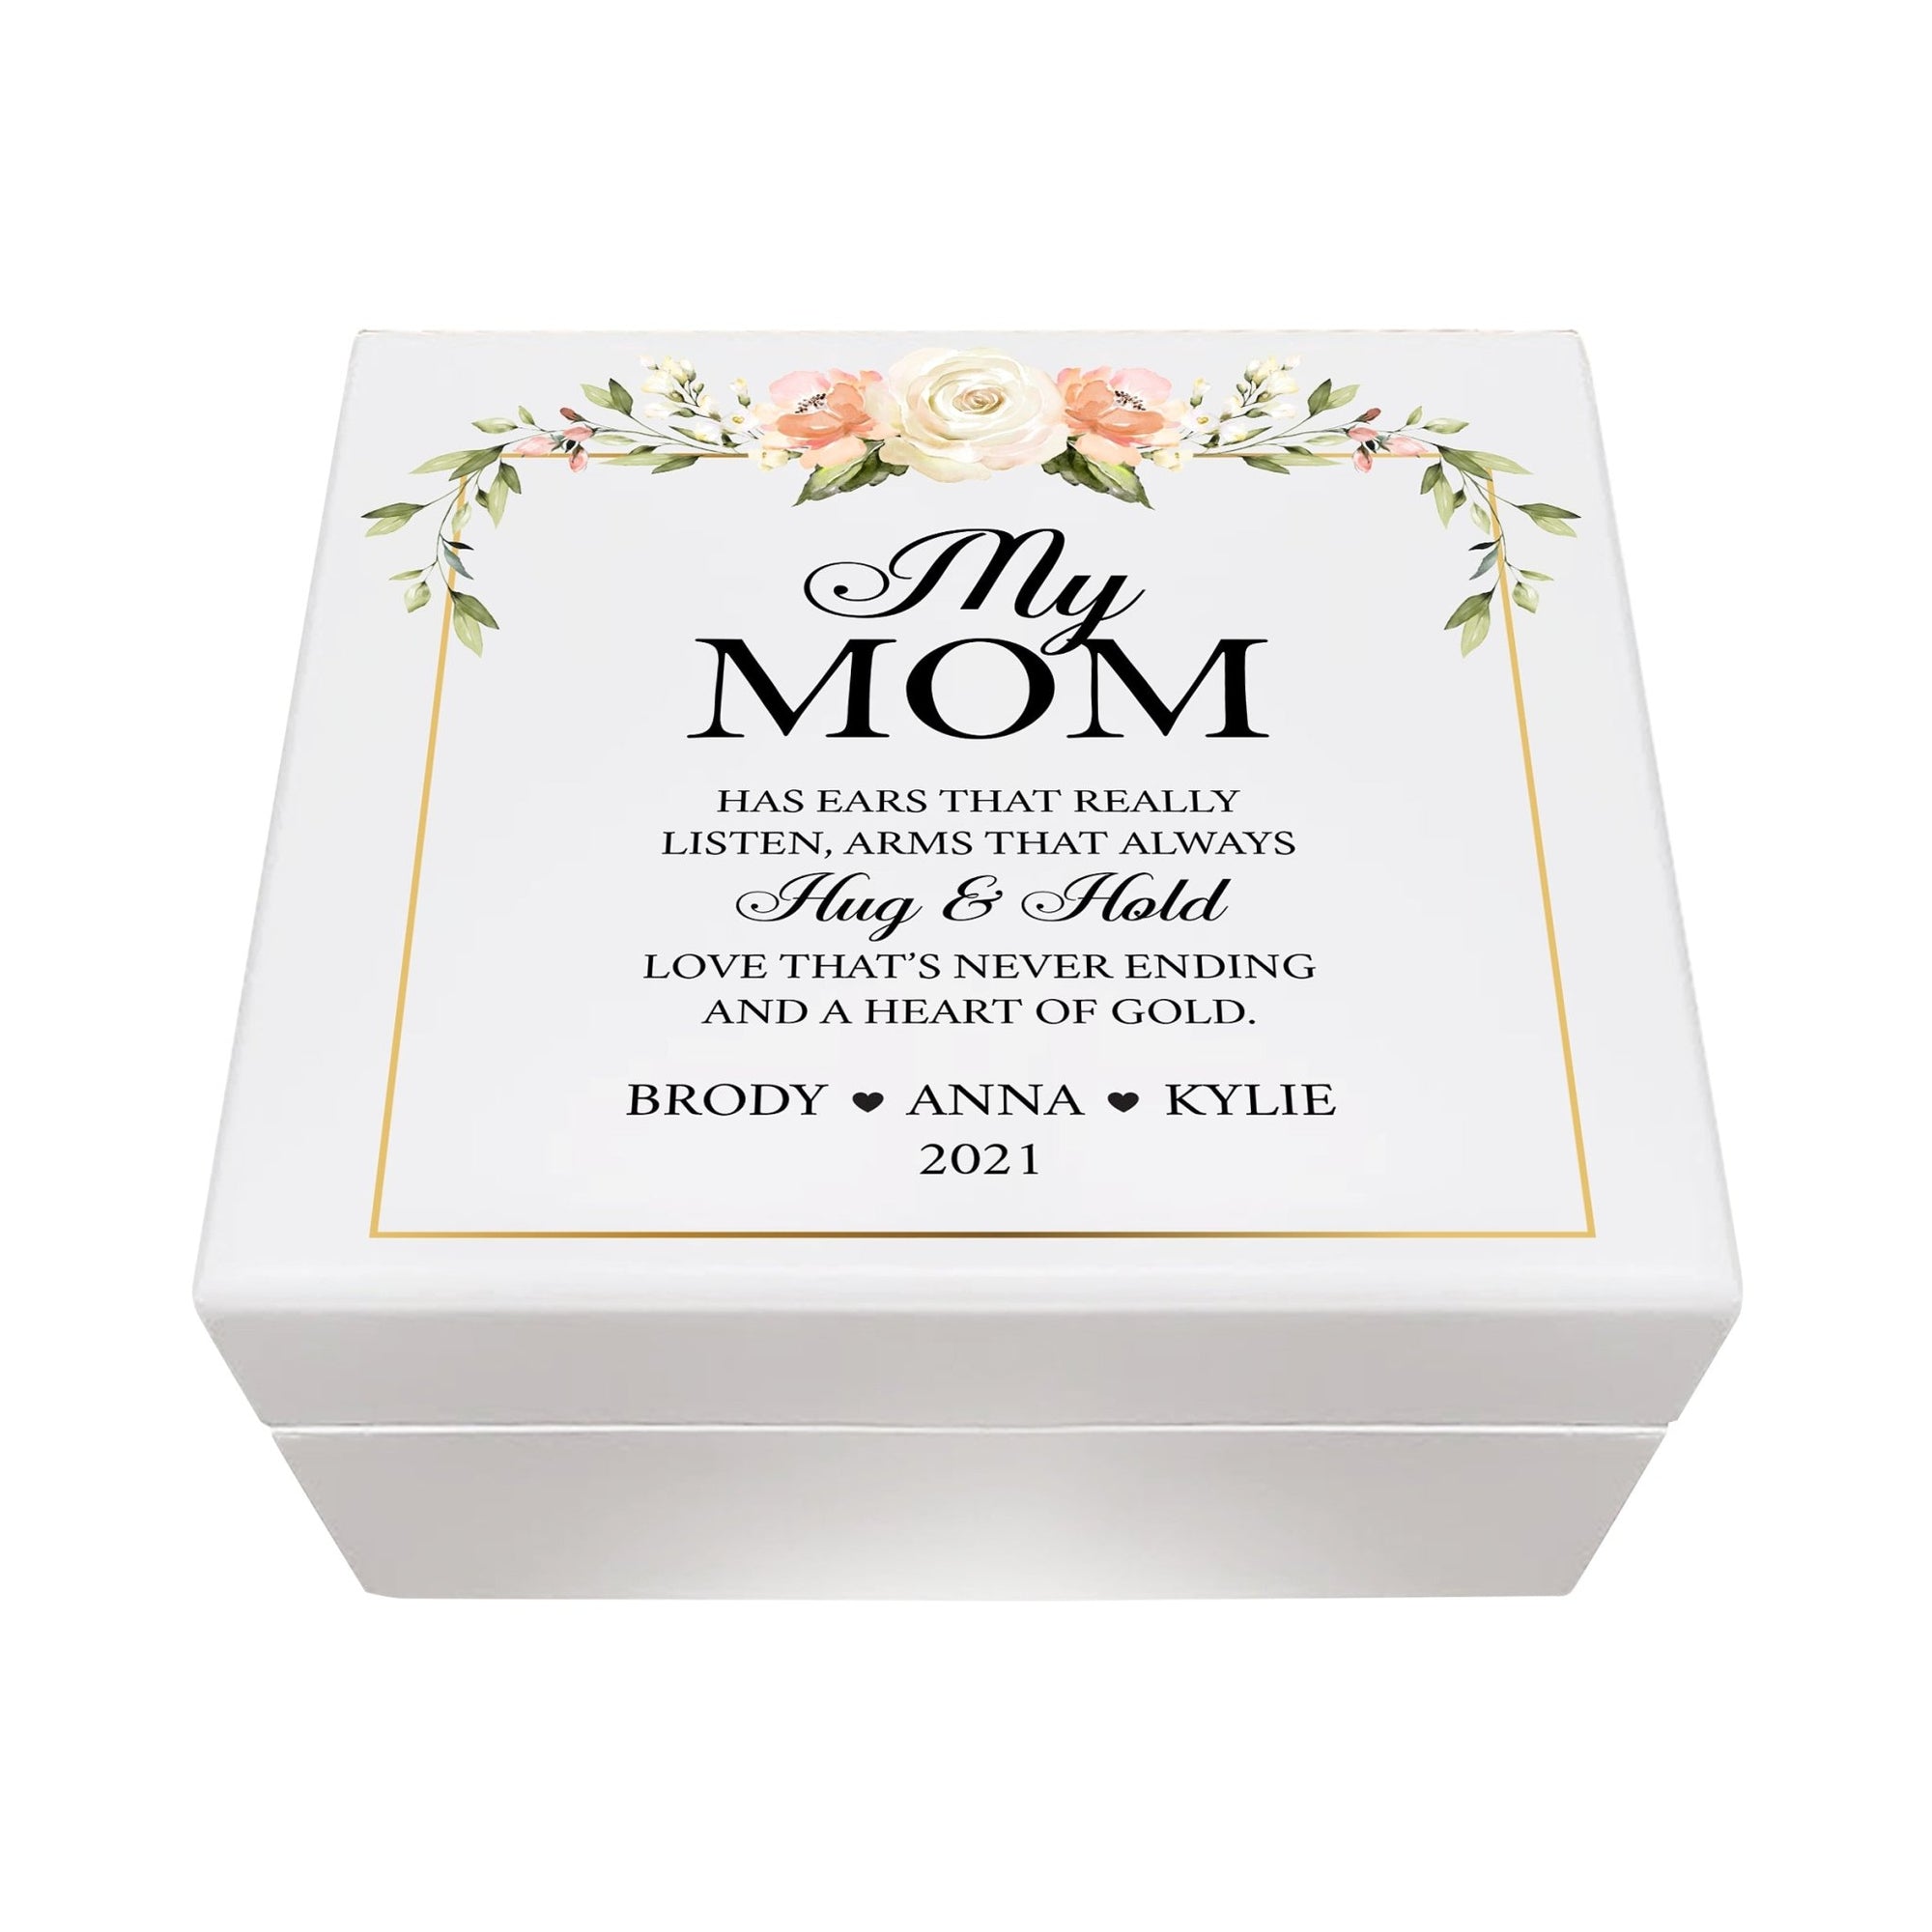 Personalized Memorable Mother’s White Keepsake Box 6x5.5 with inspiring verse - Hug and Hold - LifeSong Milestones